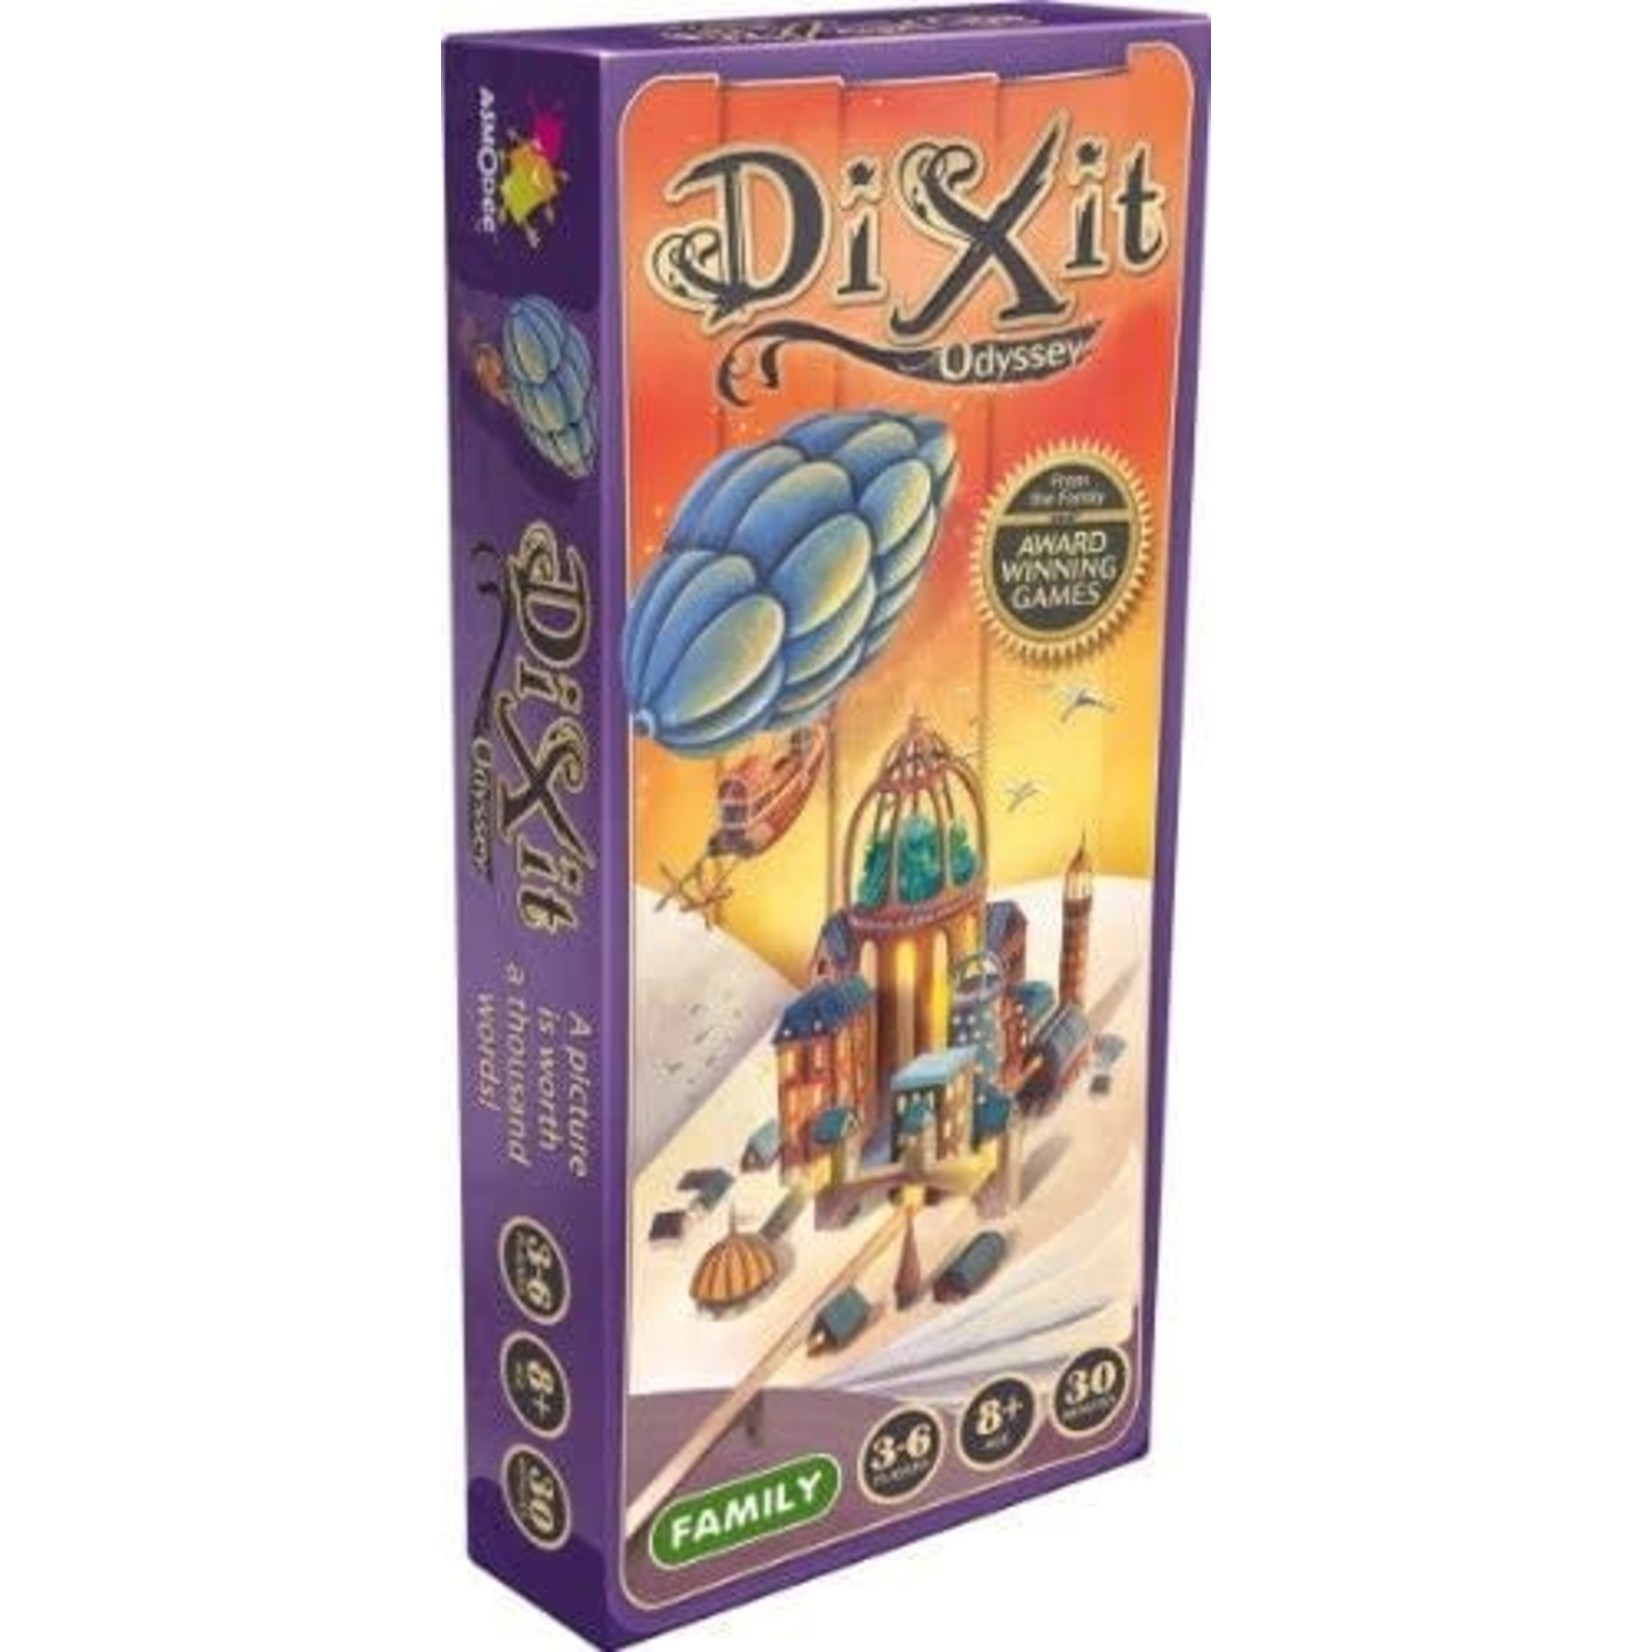 Dixit Odyssey Expansion Board Game